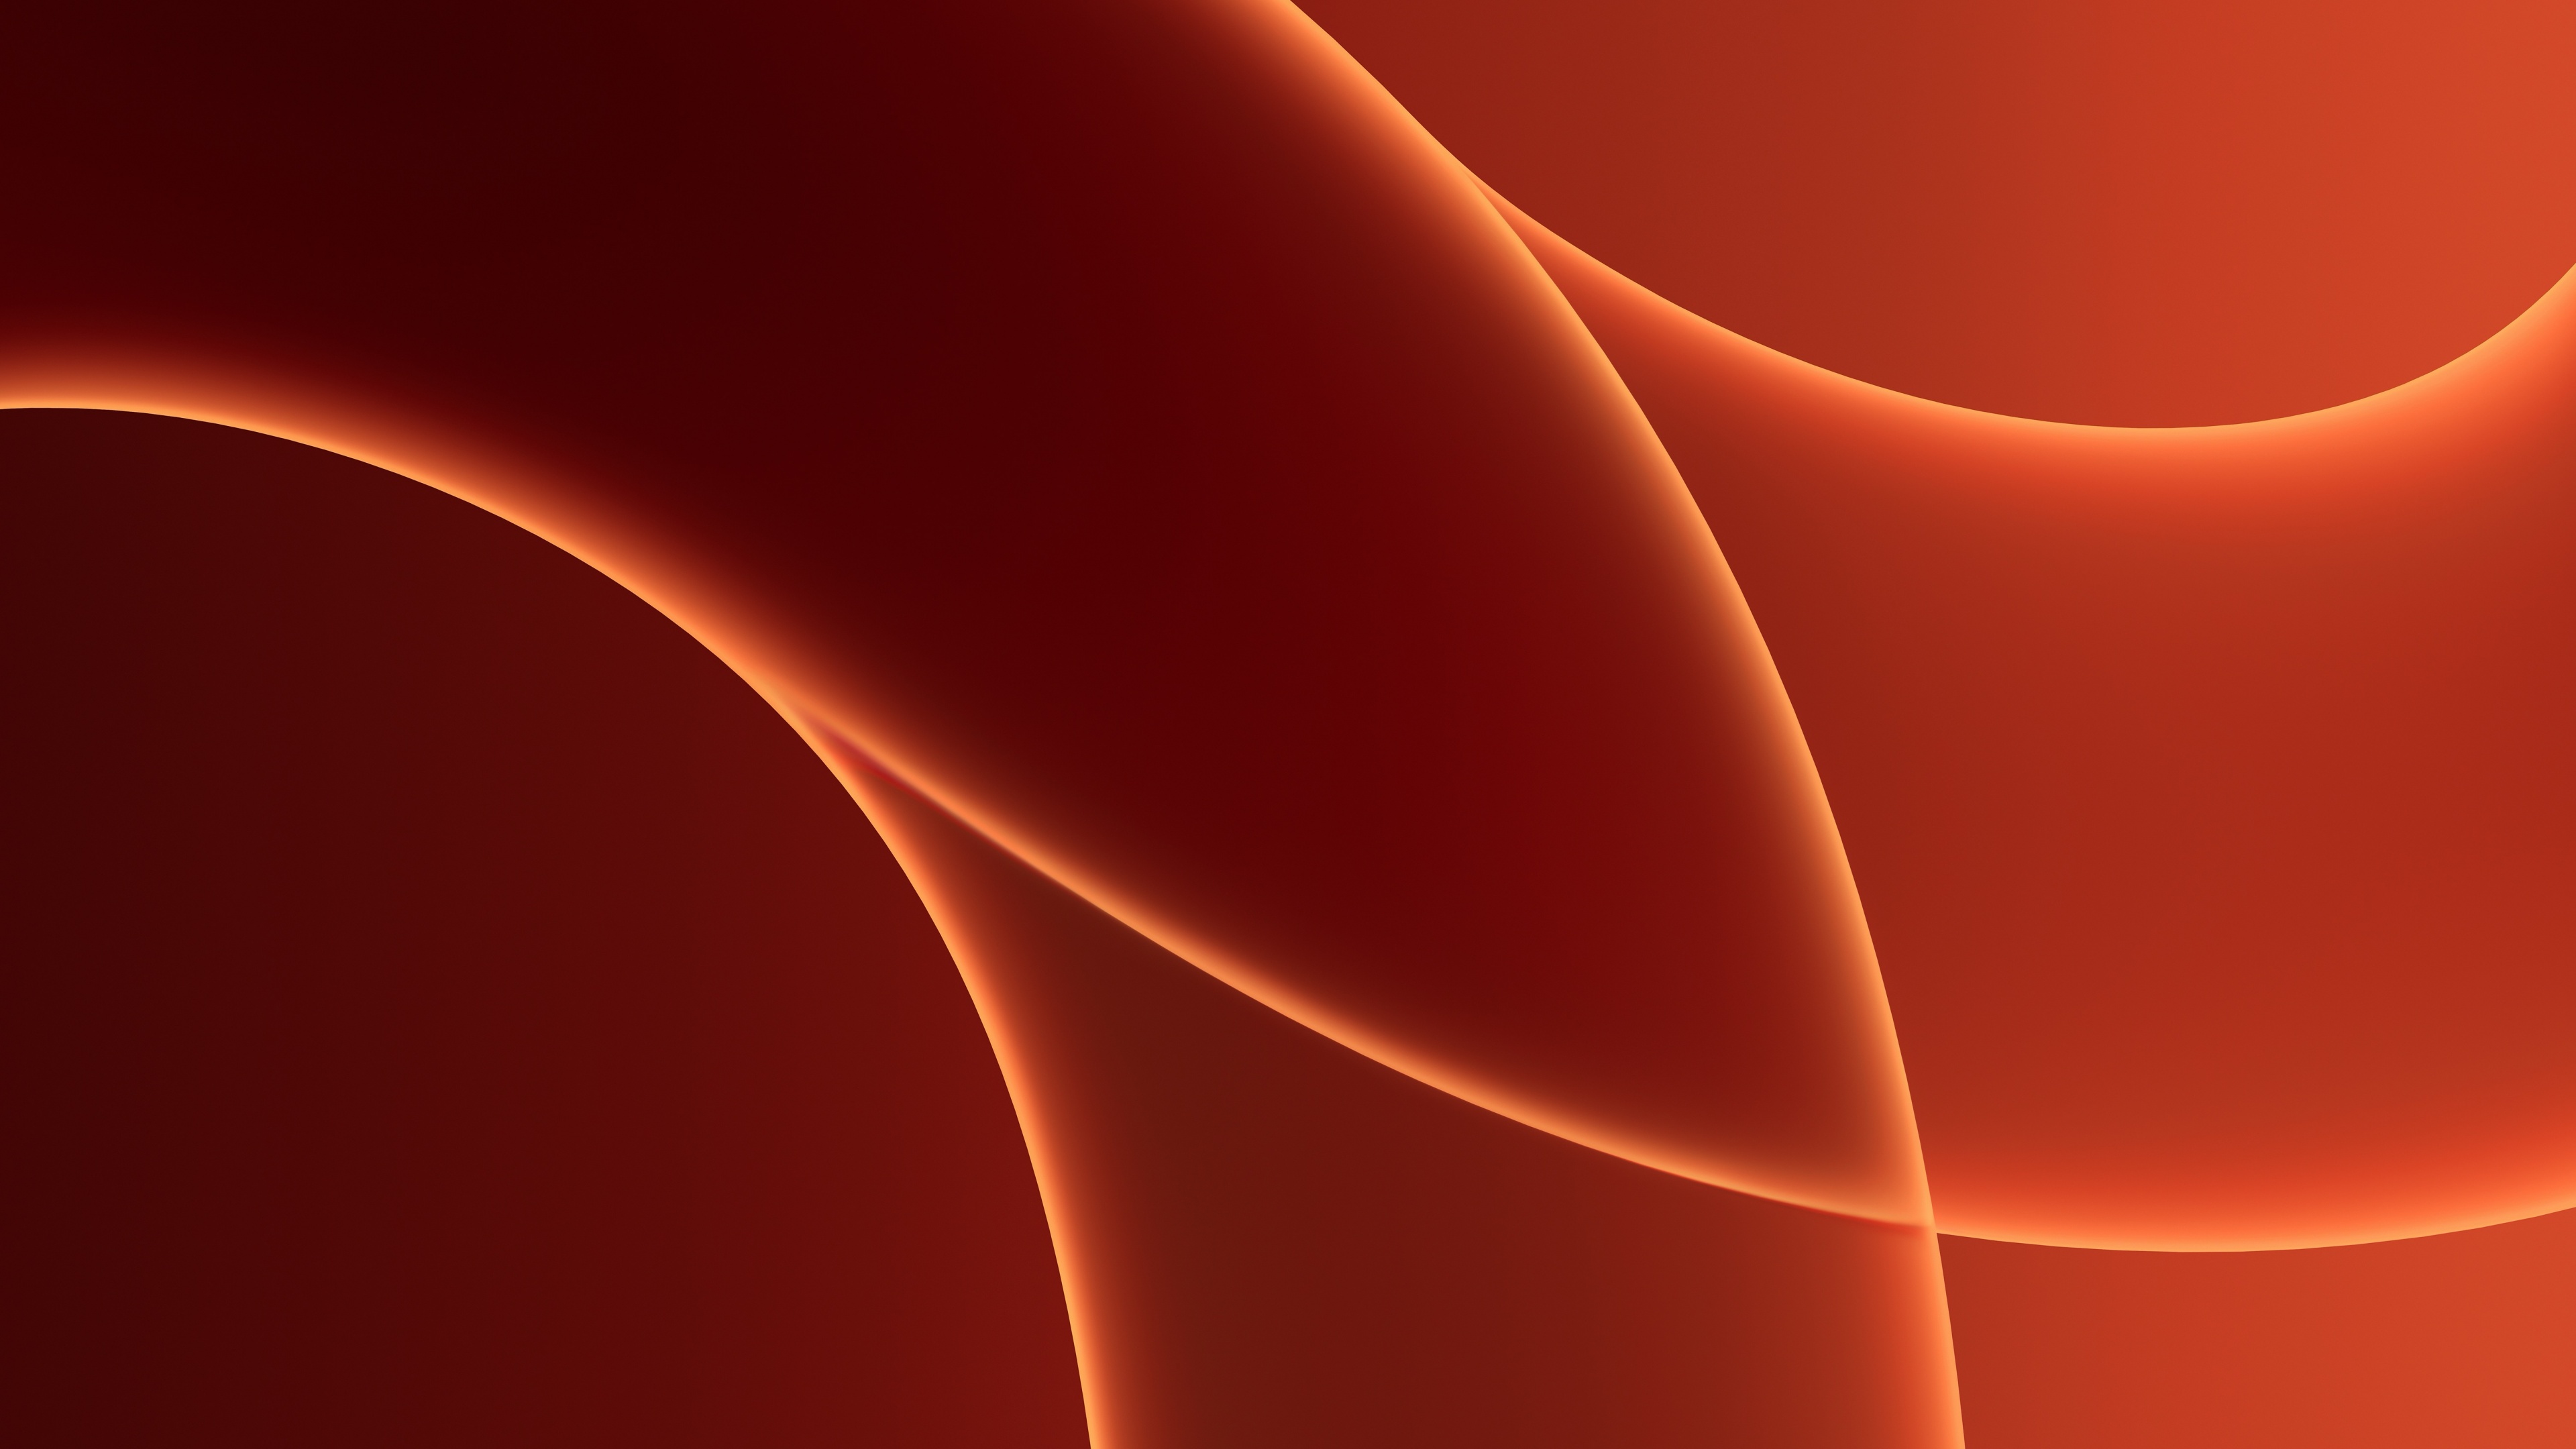 3840x1080 orange wallpaper 3840x1080 with high quality and resolution